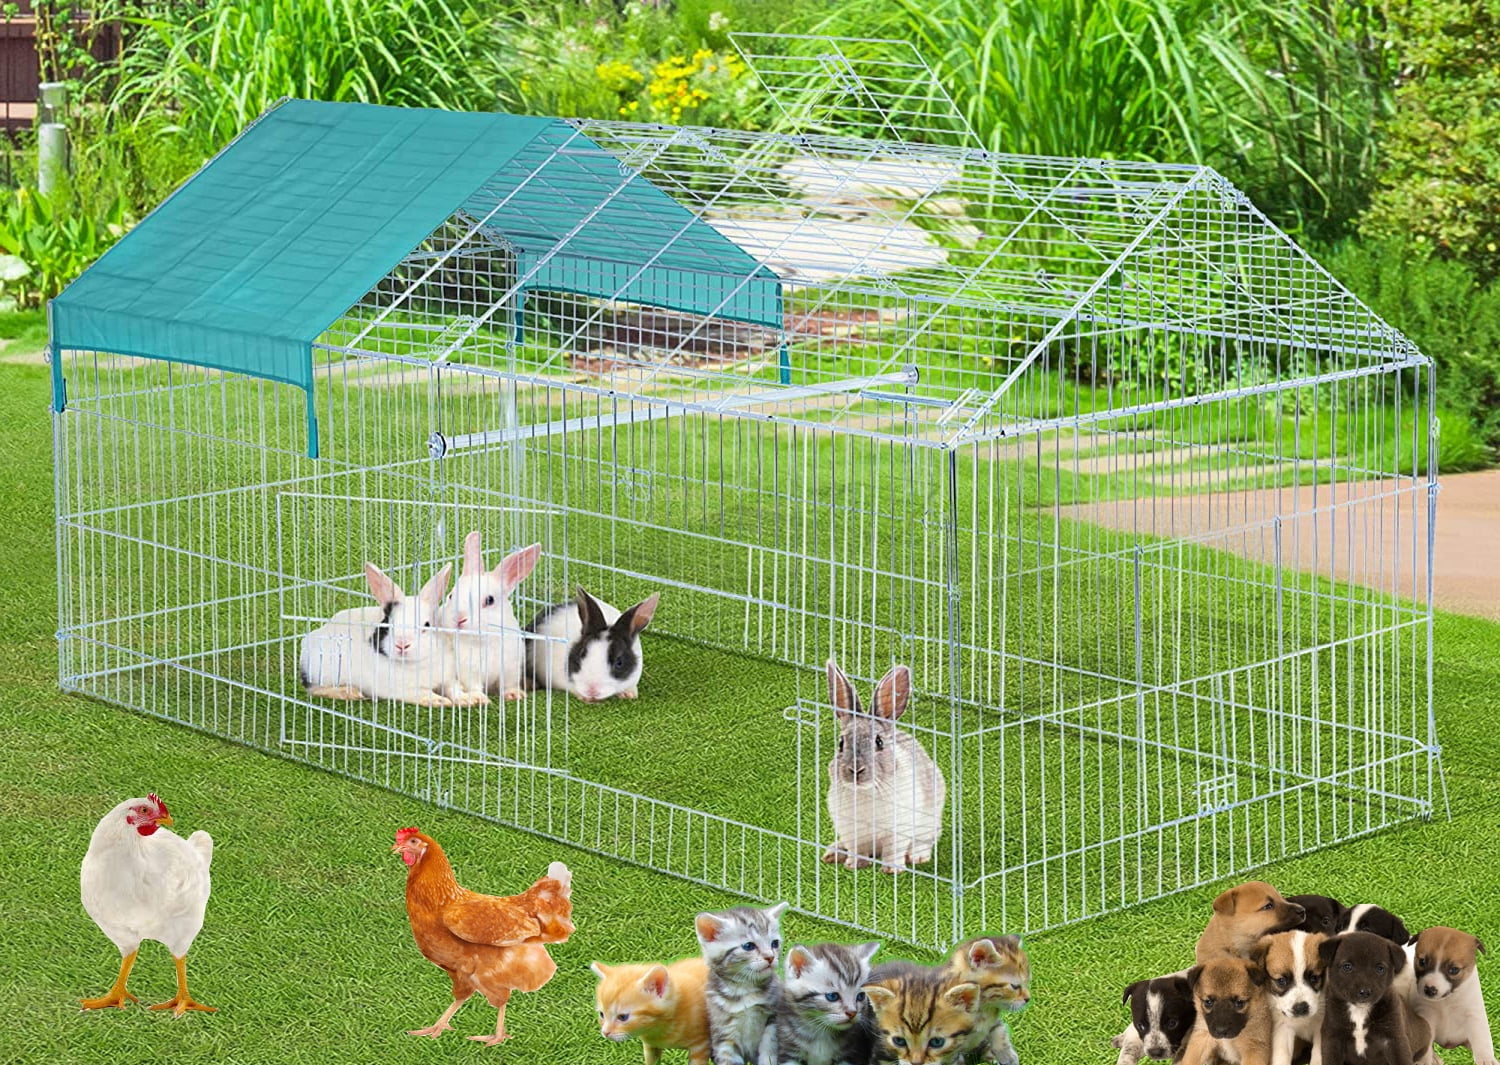 Portable Chicken Run Hen Coop,Walk-in Poultry House,Outdoor Gardening Net,Easy-up Small Animals Enclosure for Protecting Pet and Plant with Metal Frames and 10 Stakes in Backyard and Farm 